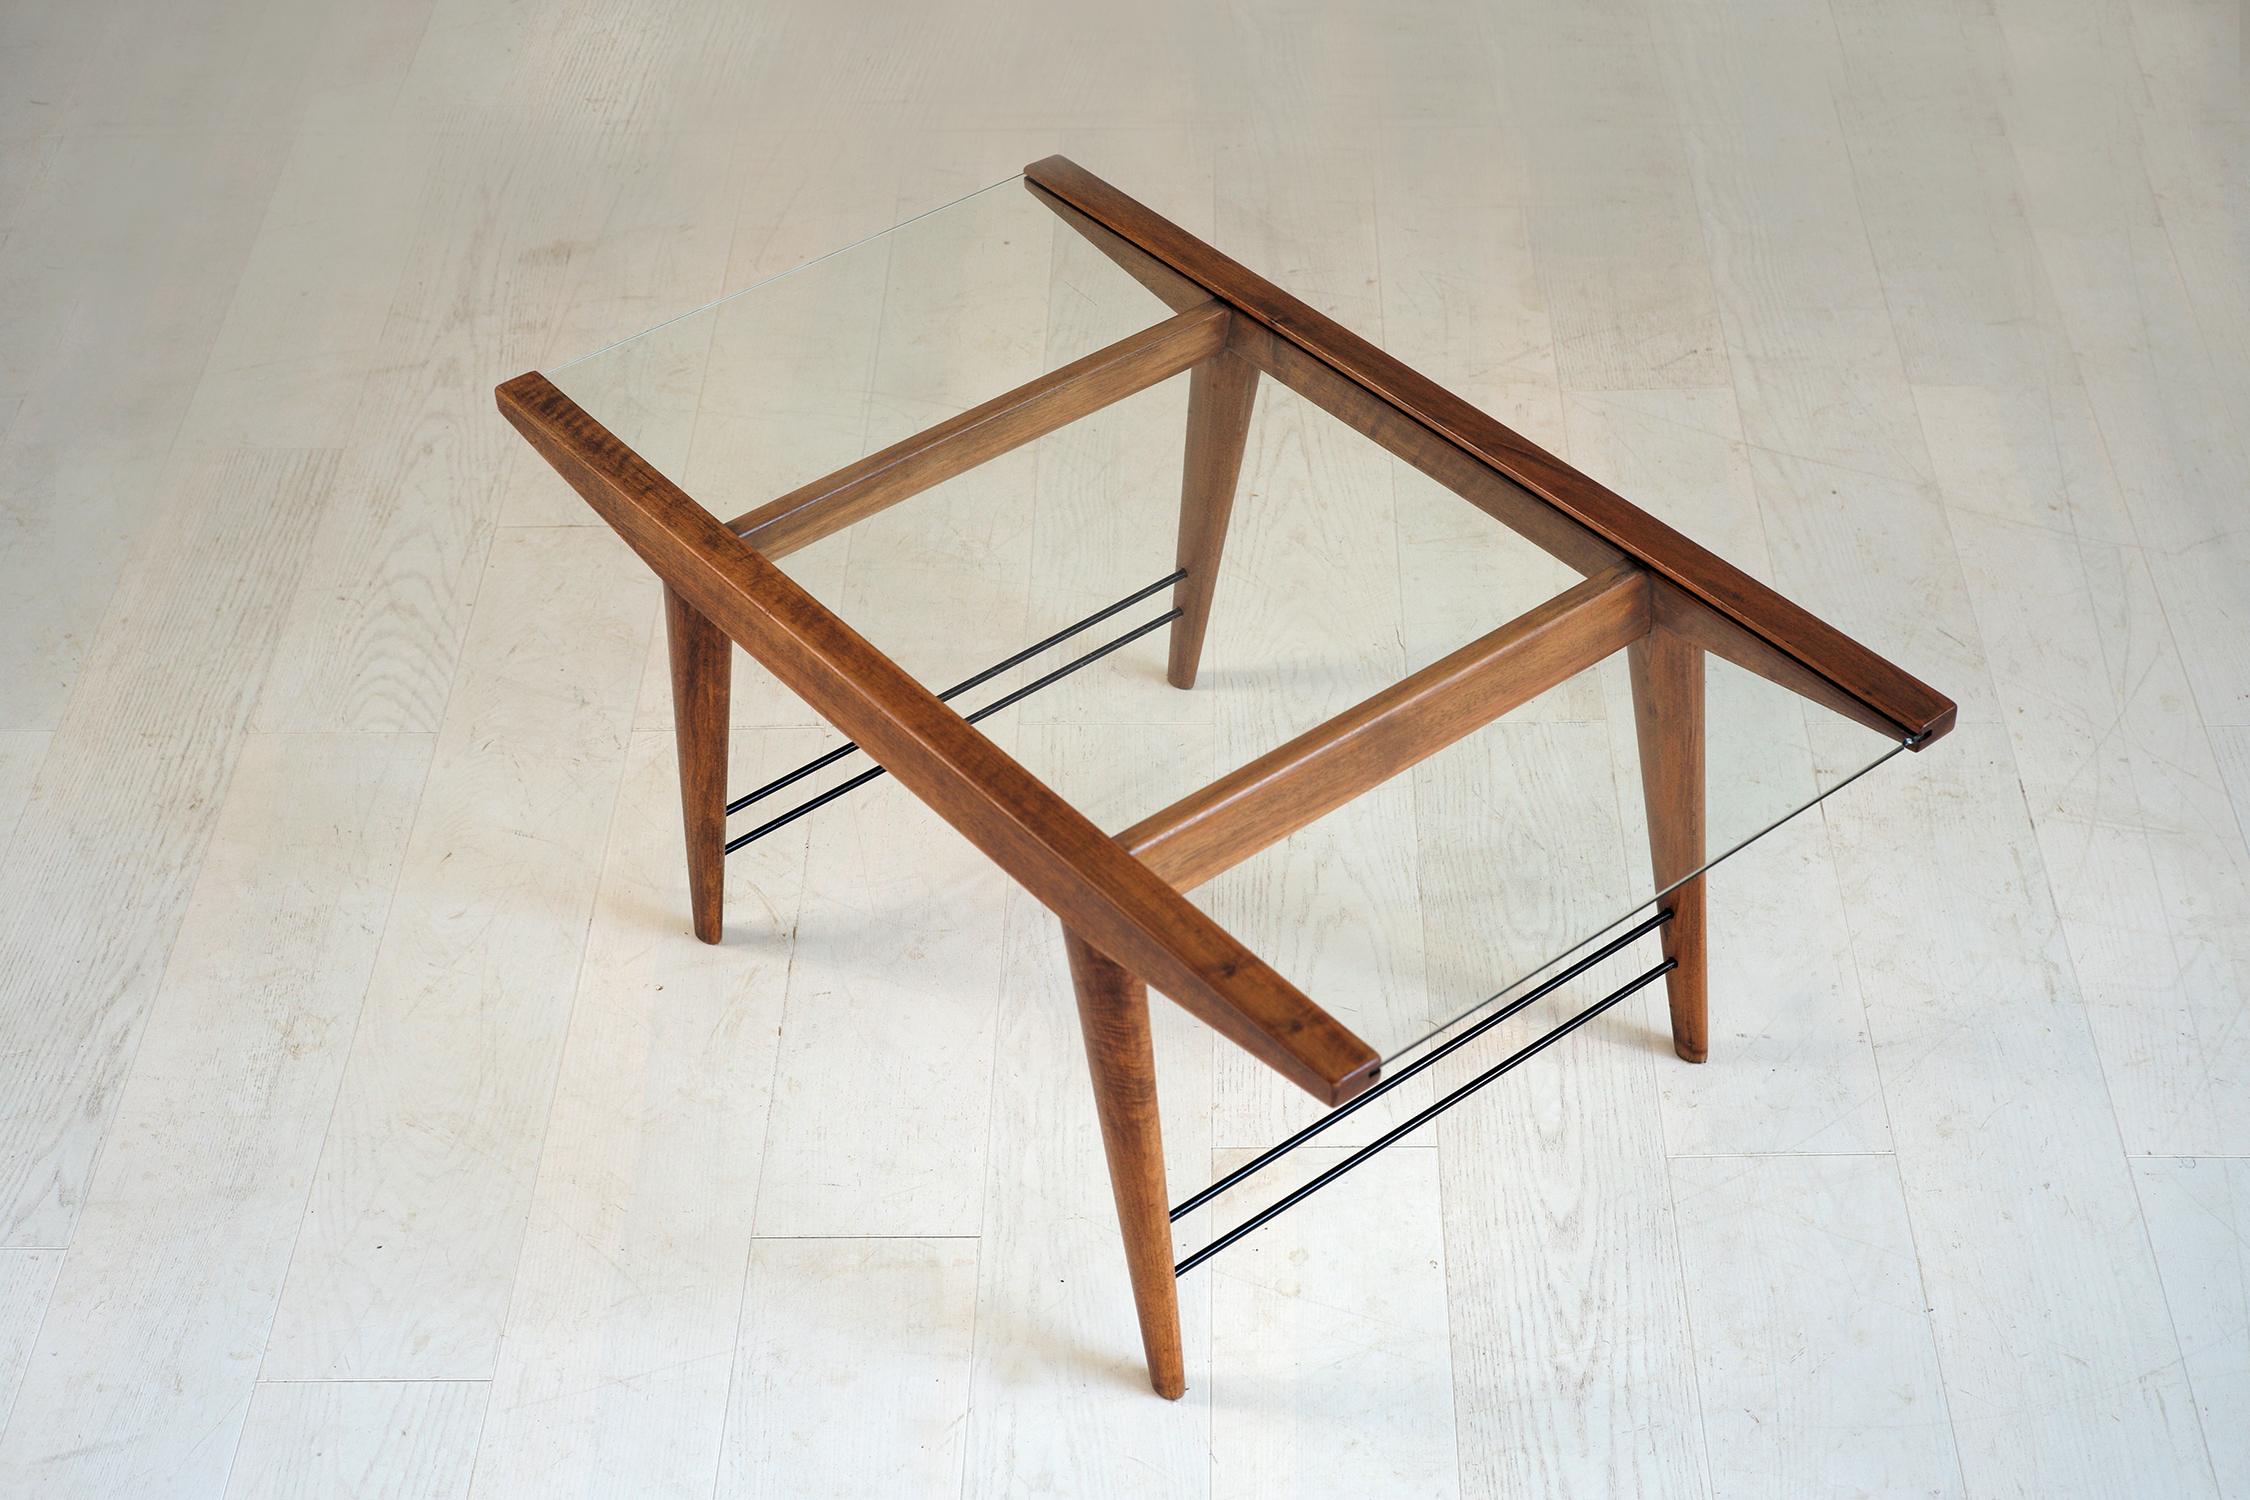 French Modernist Coffee Table in Mahogany, Brass and Glass, France, 1950 For Sale